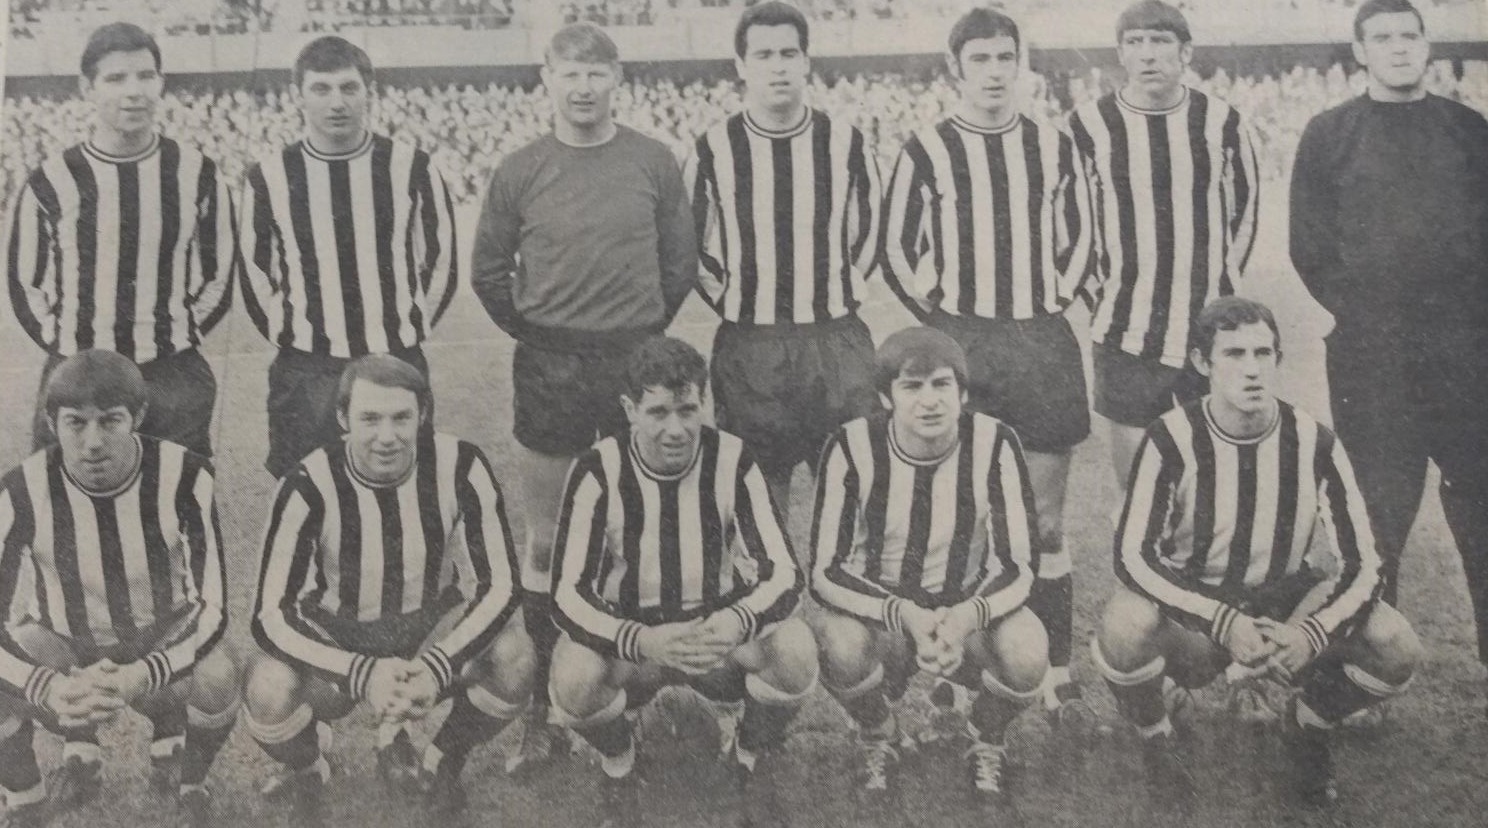 The Newcastle team that face Reading in the 1969 FA Cup